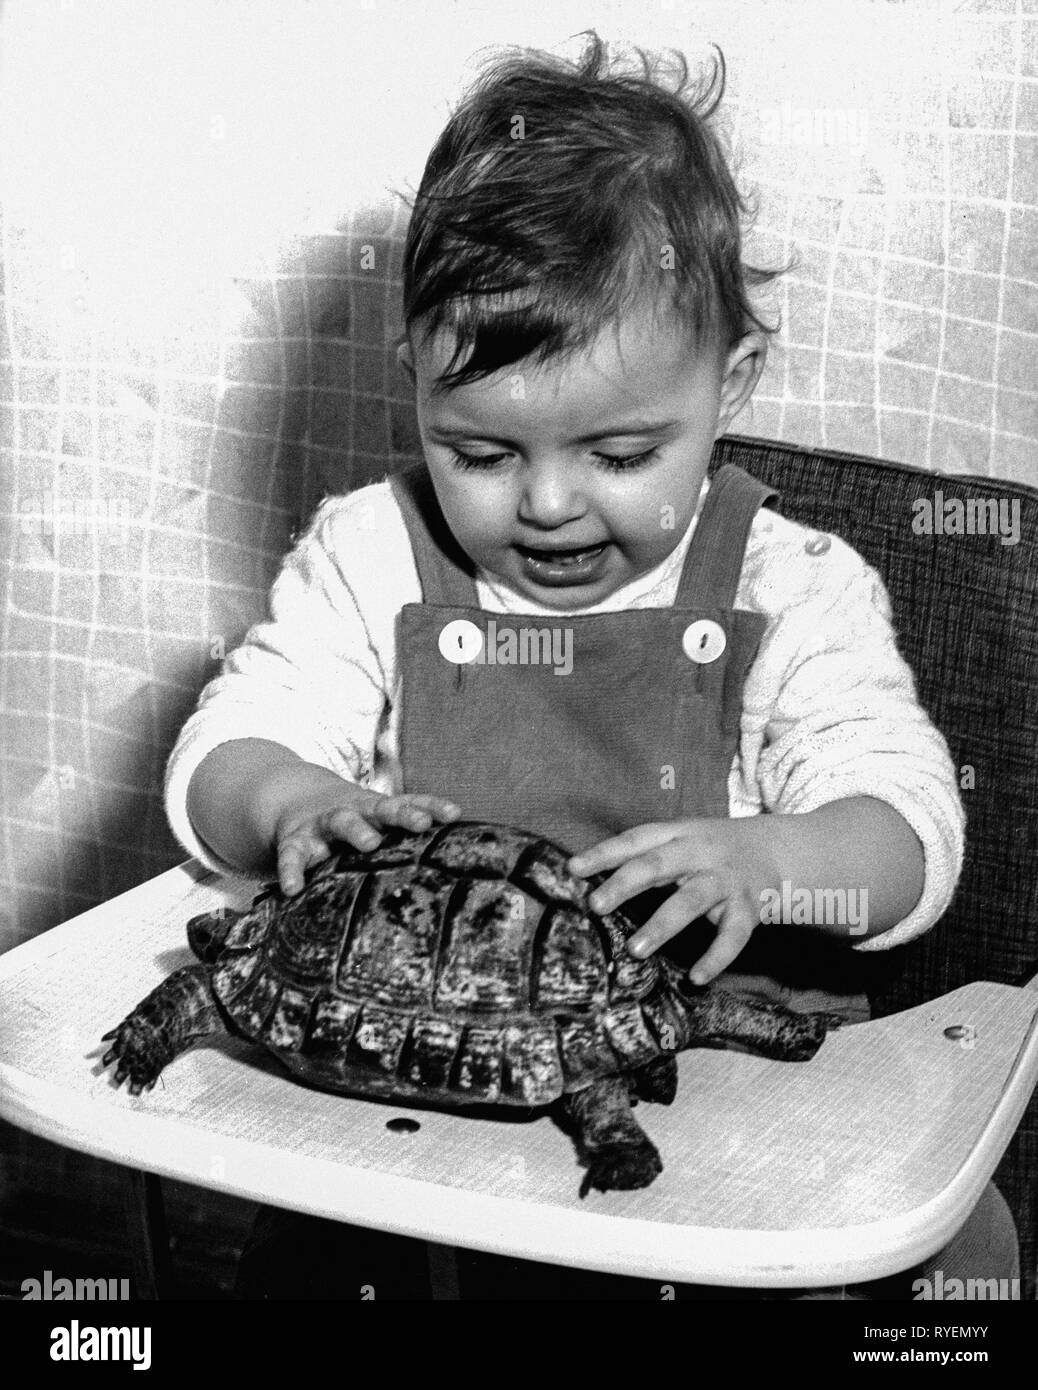 people, child / children, with animals, baby with tortoise, 1960s, Model-Released Stock Photo